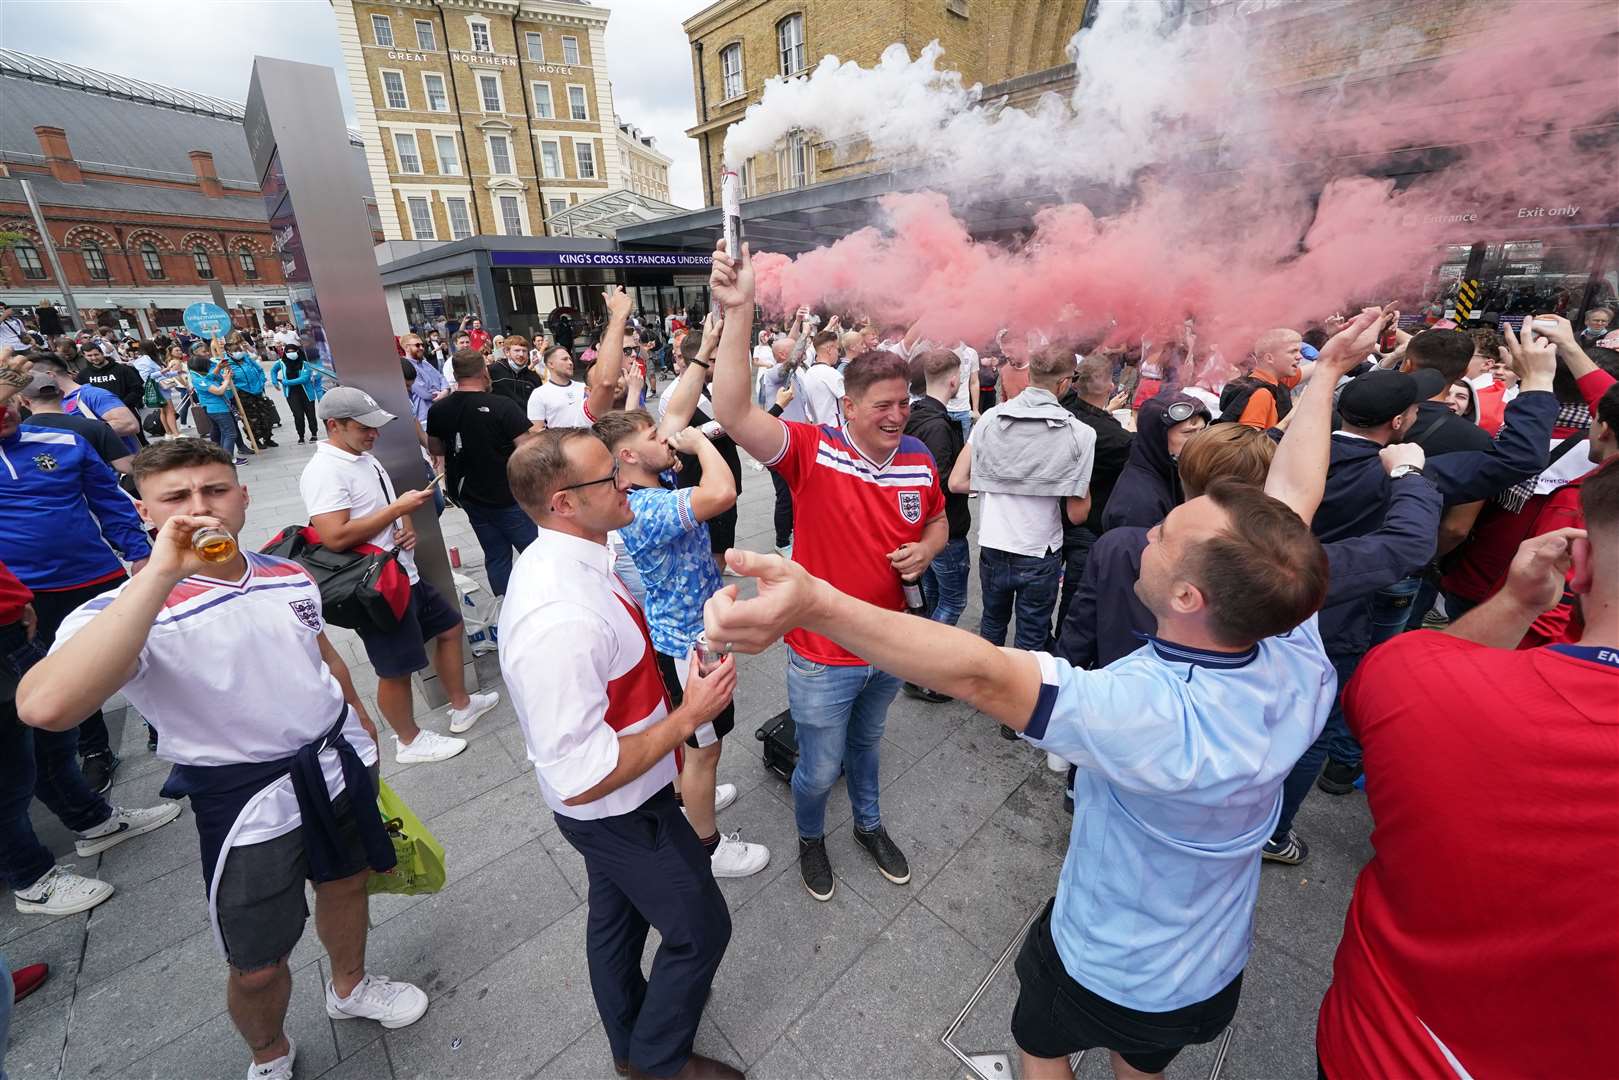 Fans from outside the capital arrive at King’s Cross station in London (Jonathan Brady/PA)